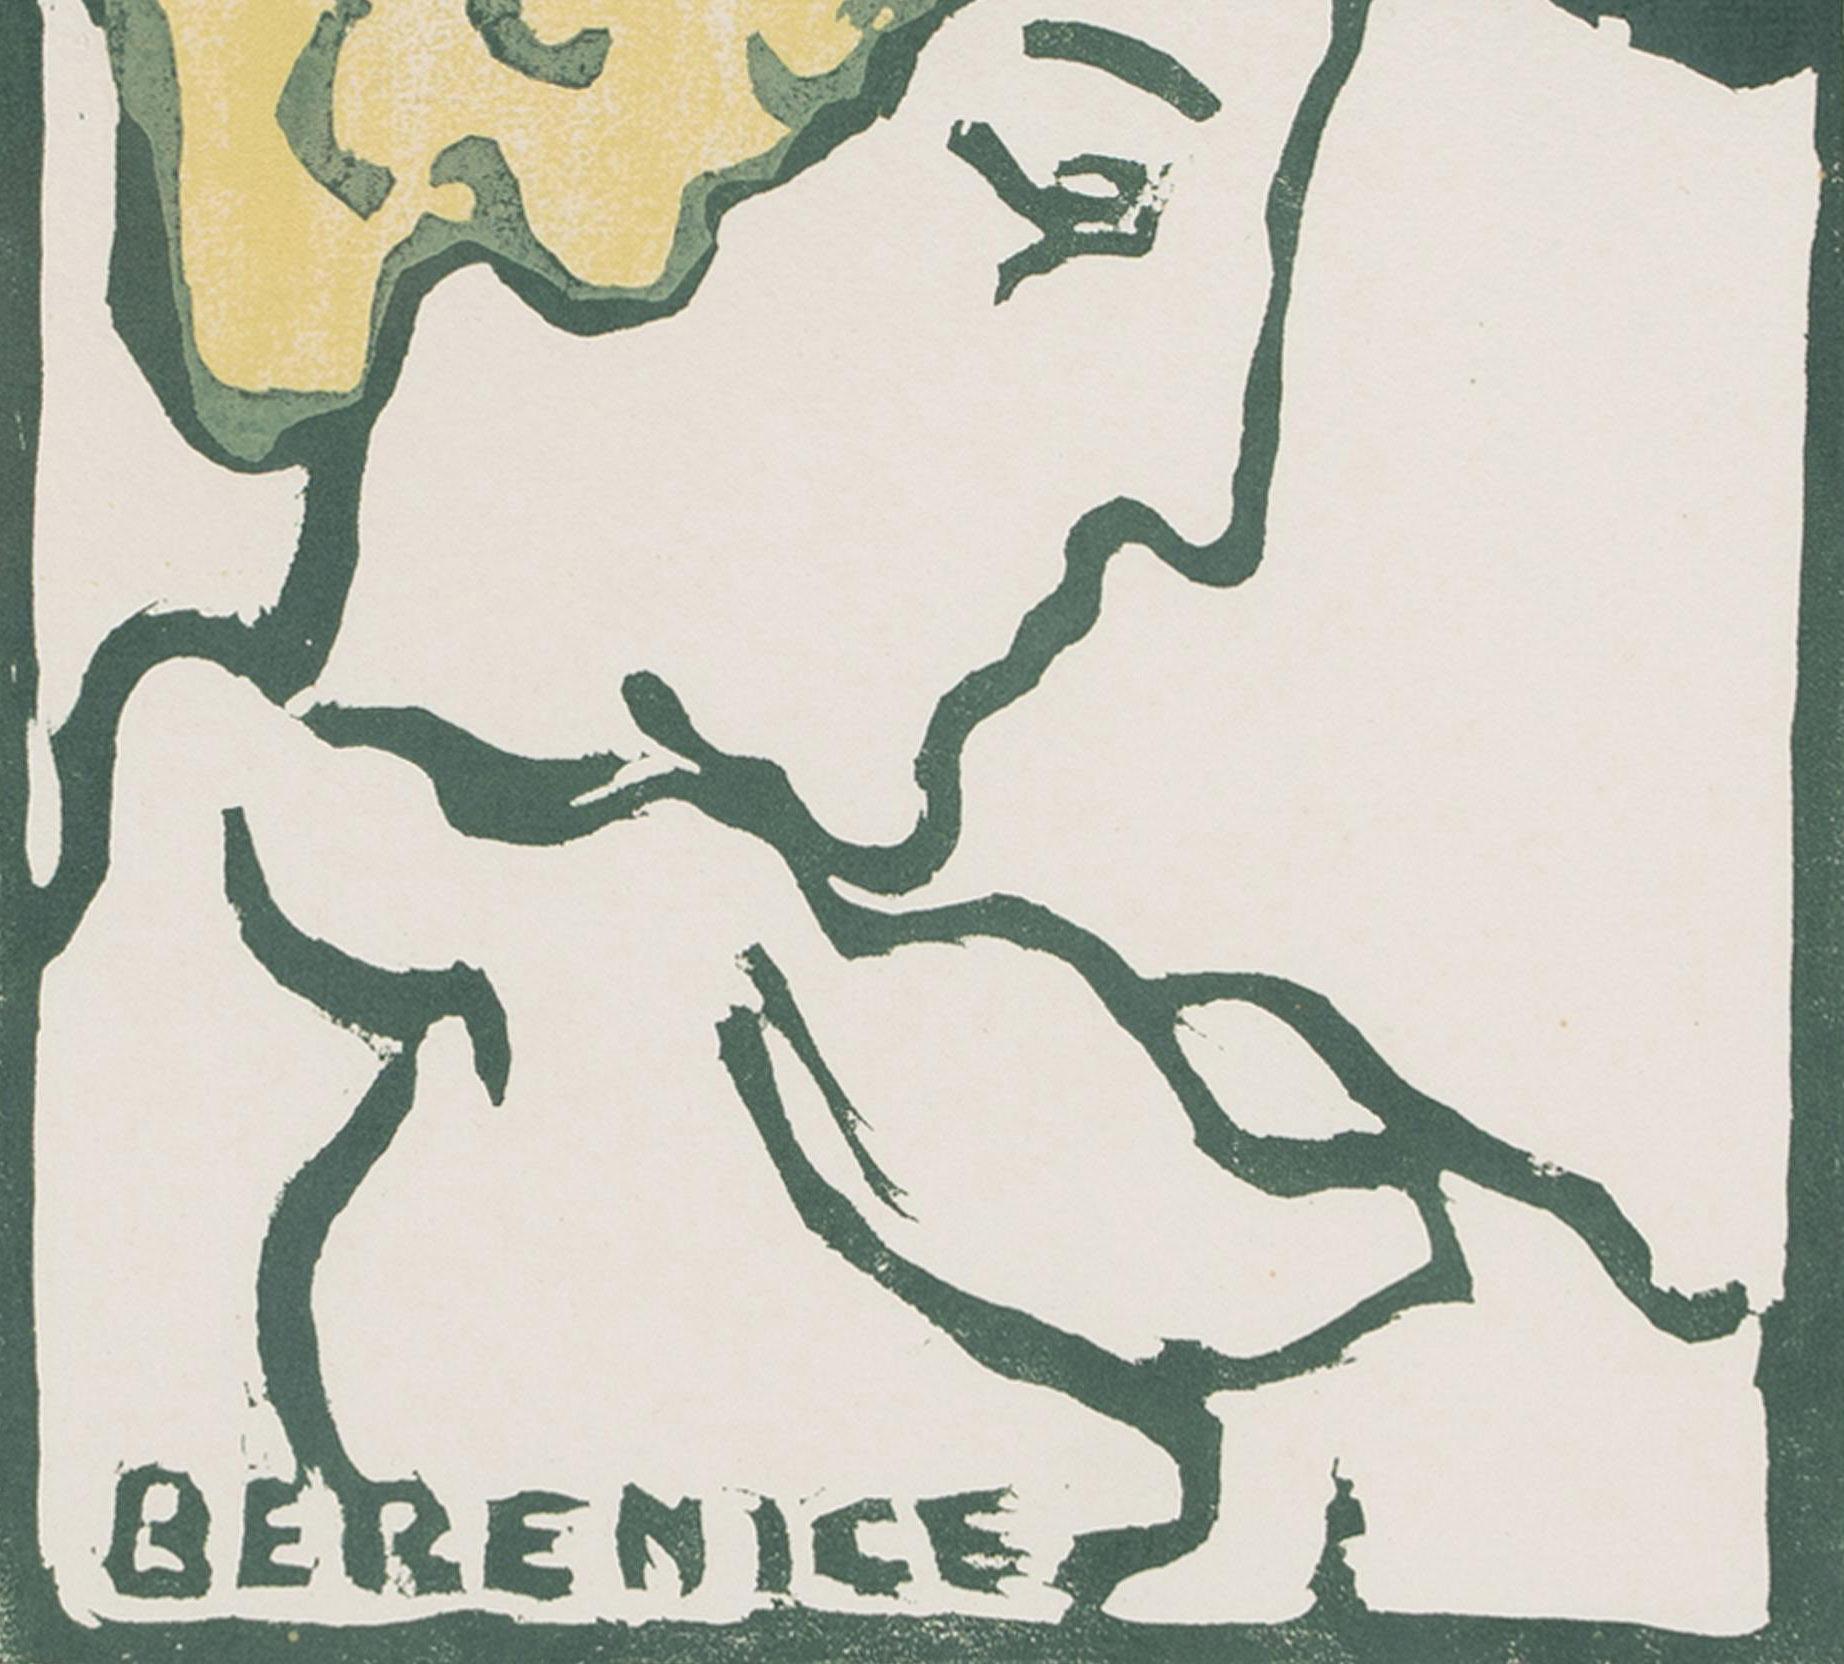 Berenice
Color woodcut, 1900-1910
Signed with the artist's red ink stamp (see photo)
Edition: 50 (46/50)
Signed with the artist's red ink initials stamp, Lugt 1771, Sup.
Condition: Excellent
Image/block size: 11 5/8 x 8 1/4 inches
Frame size:  22 x